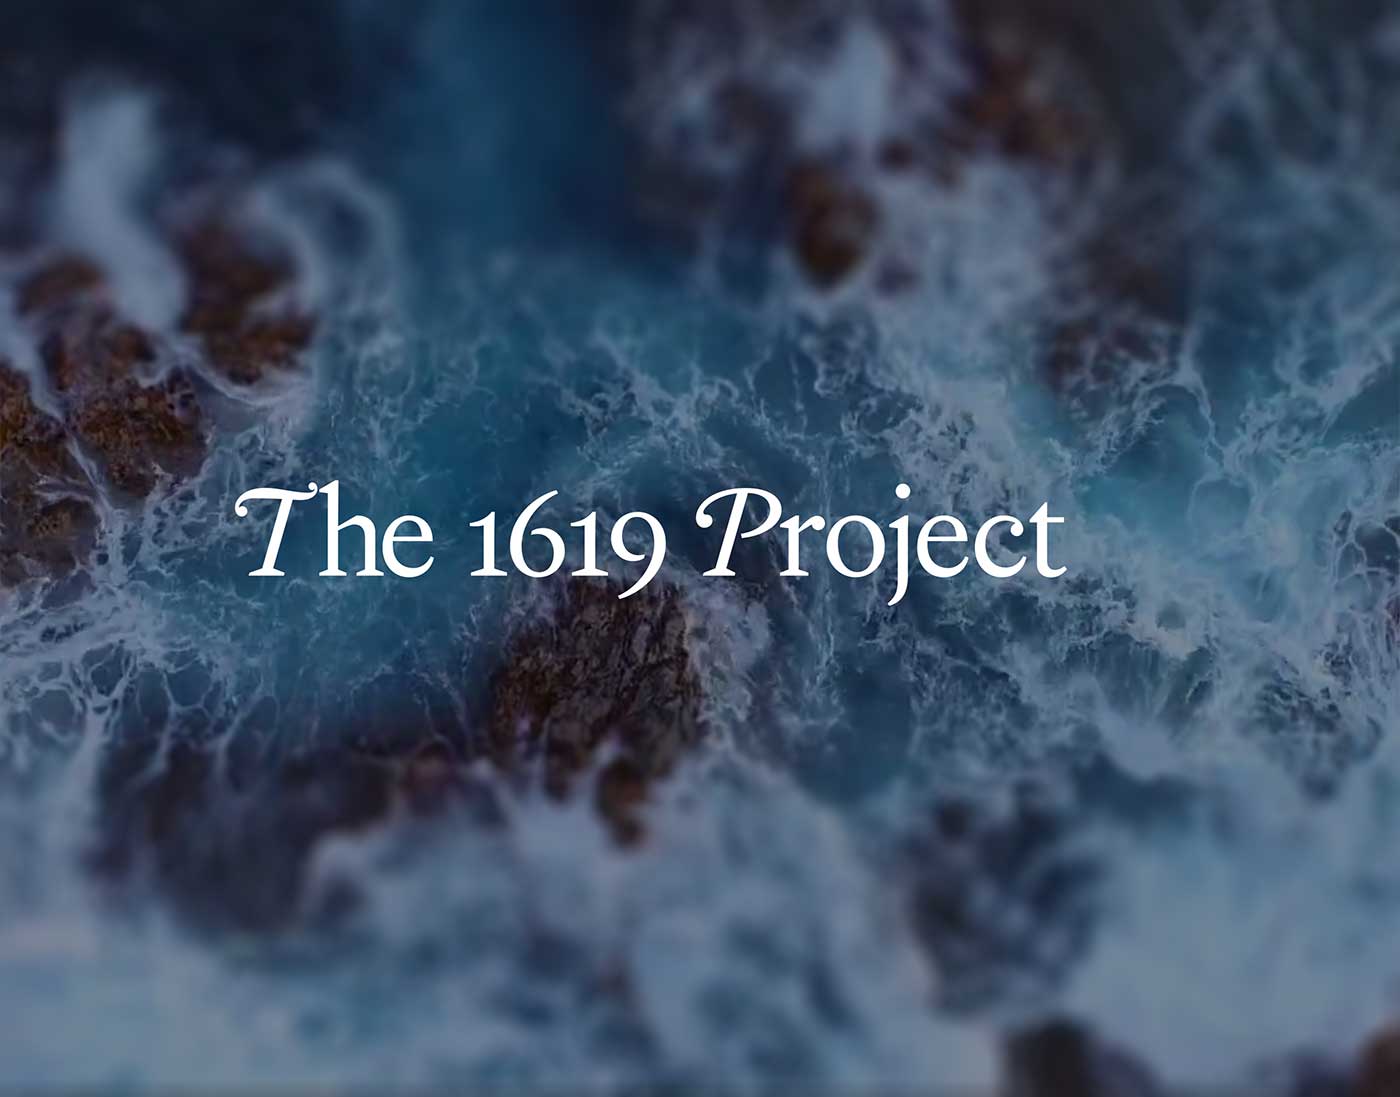 1619 project thesis